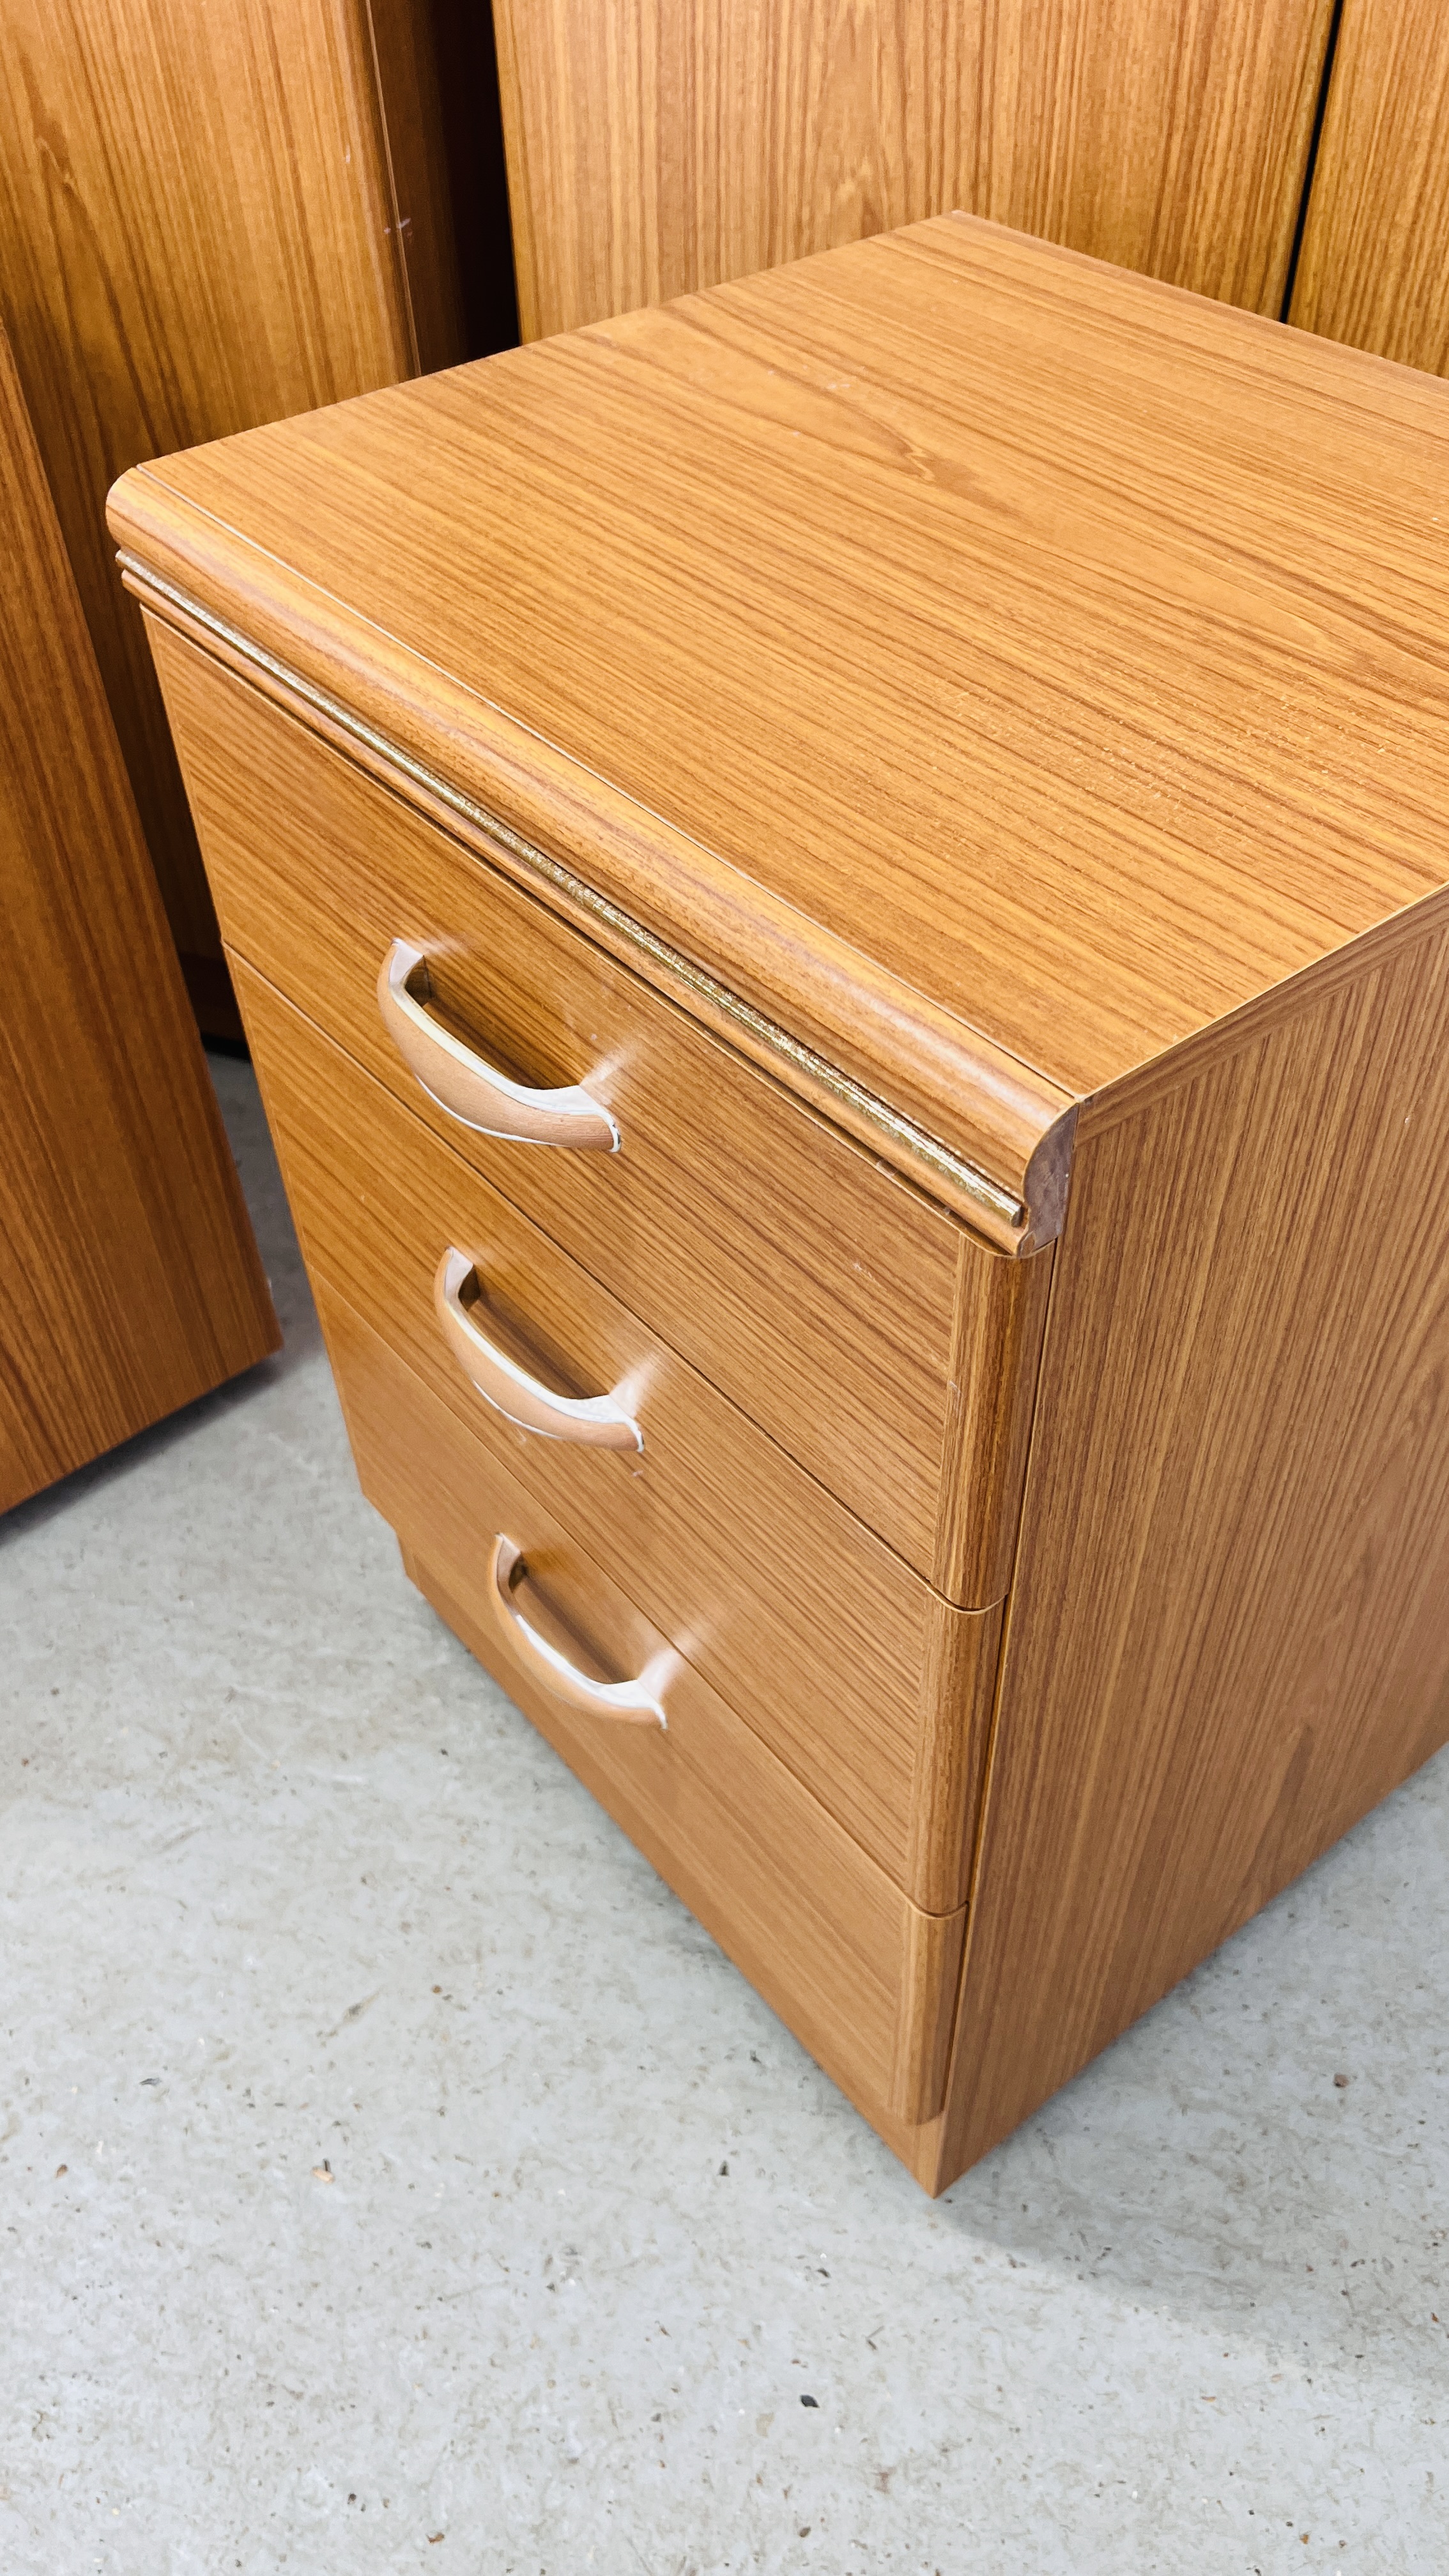 PAIR OF OAK FINISH TWO DOOR WARDROBES AND A PAIR OF MATCHING THREE DRAWER BEDSIDE CHESTS. - Image 5 of 5